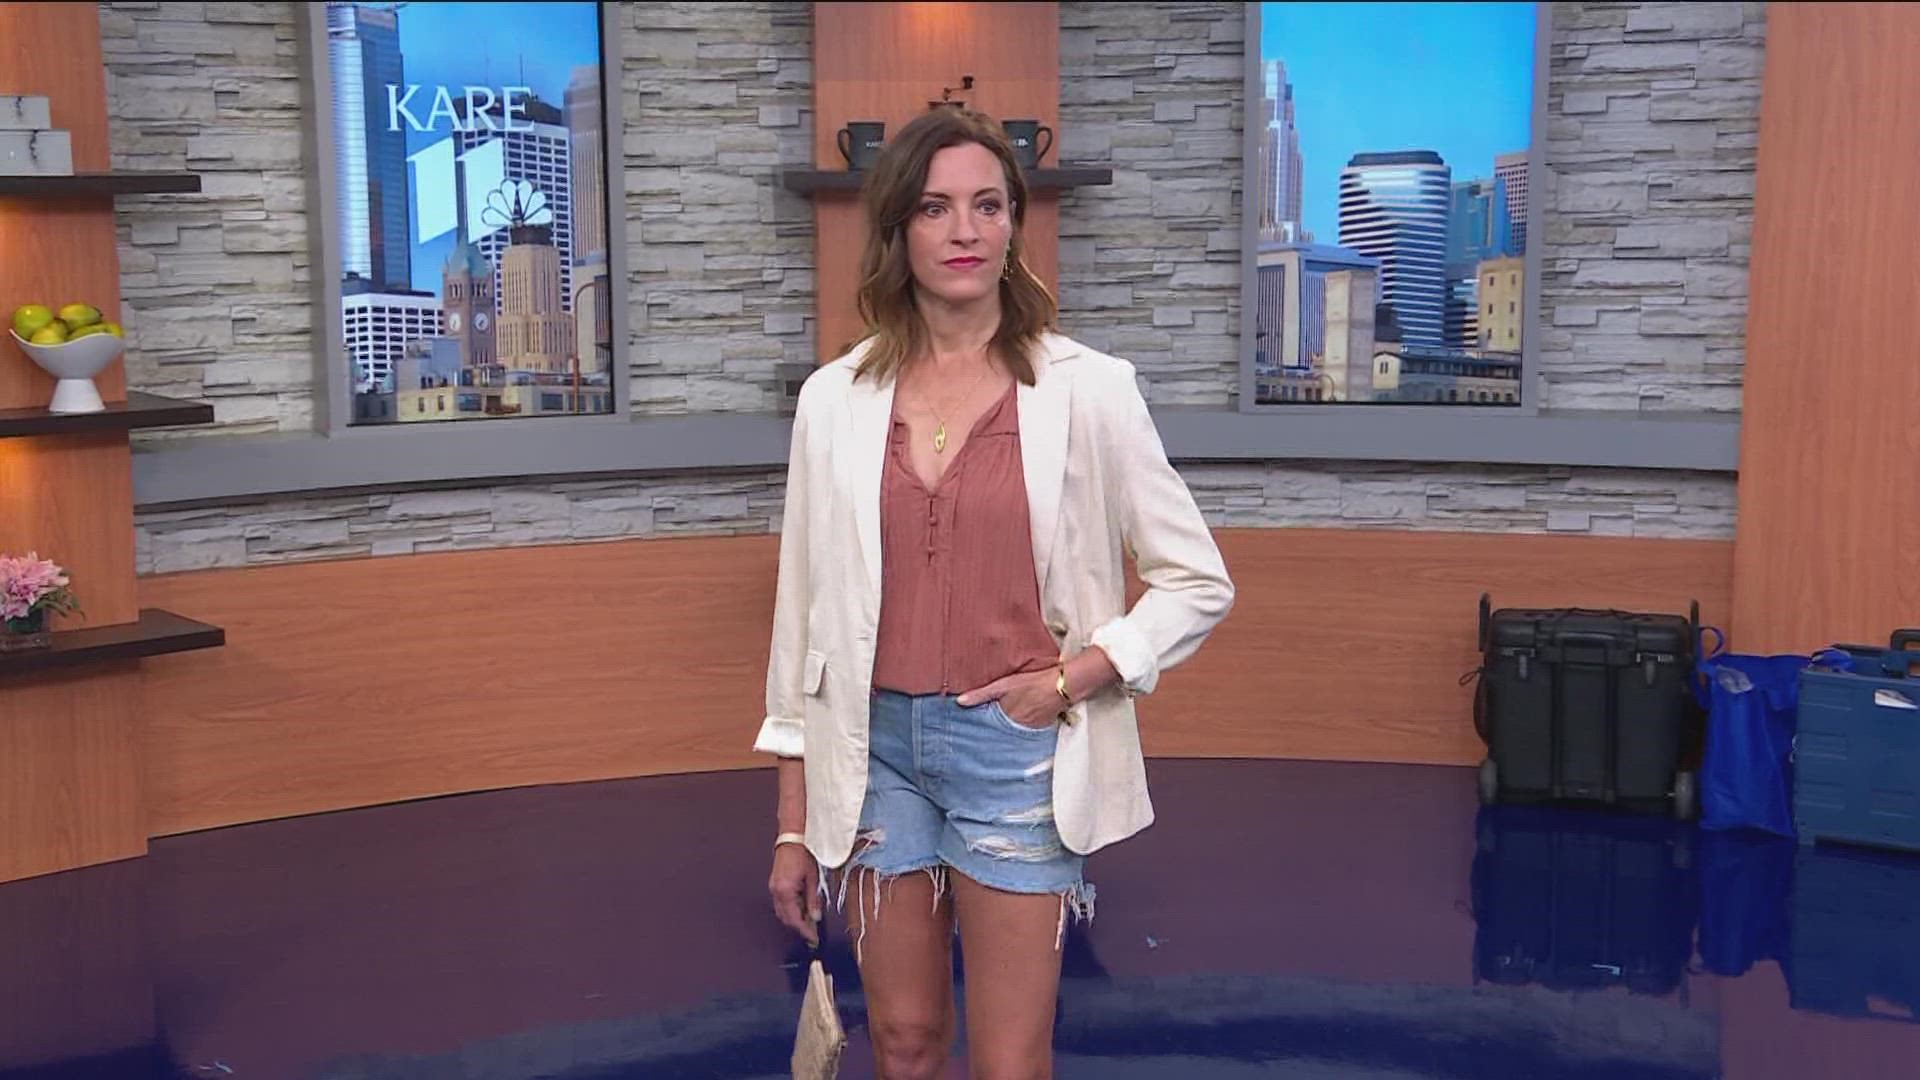 To showcase new and different styles, models wearing clothes from Fawbush's, Wild Ivy and Serge + Jane joined KARE 11 Saturday.